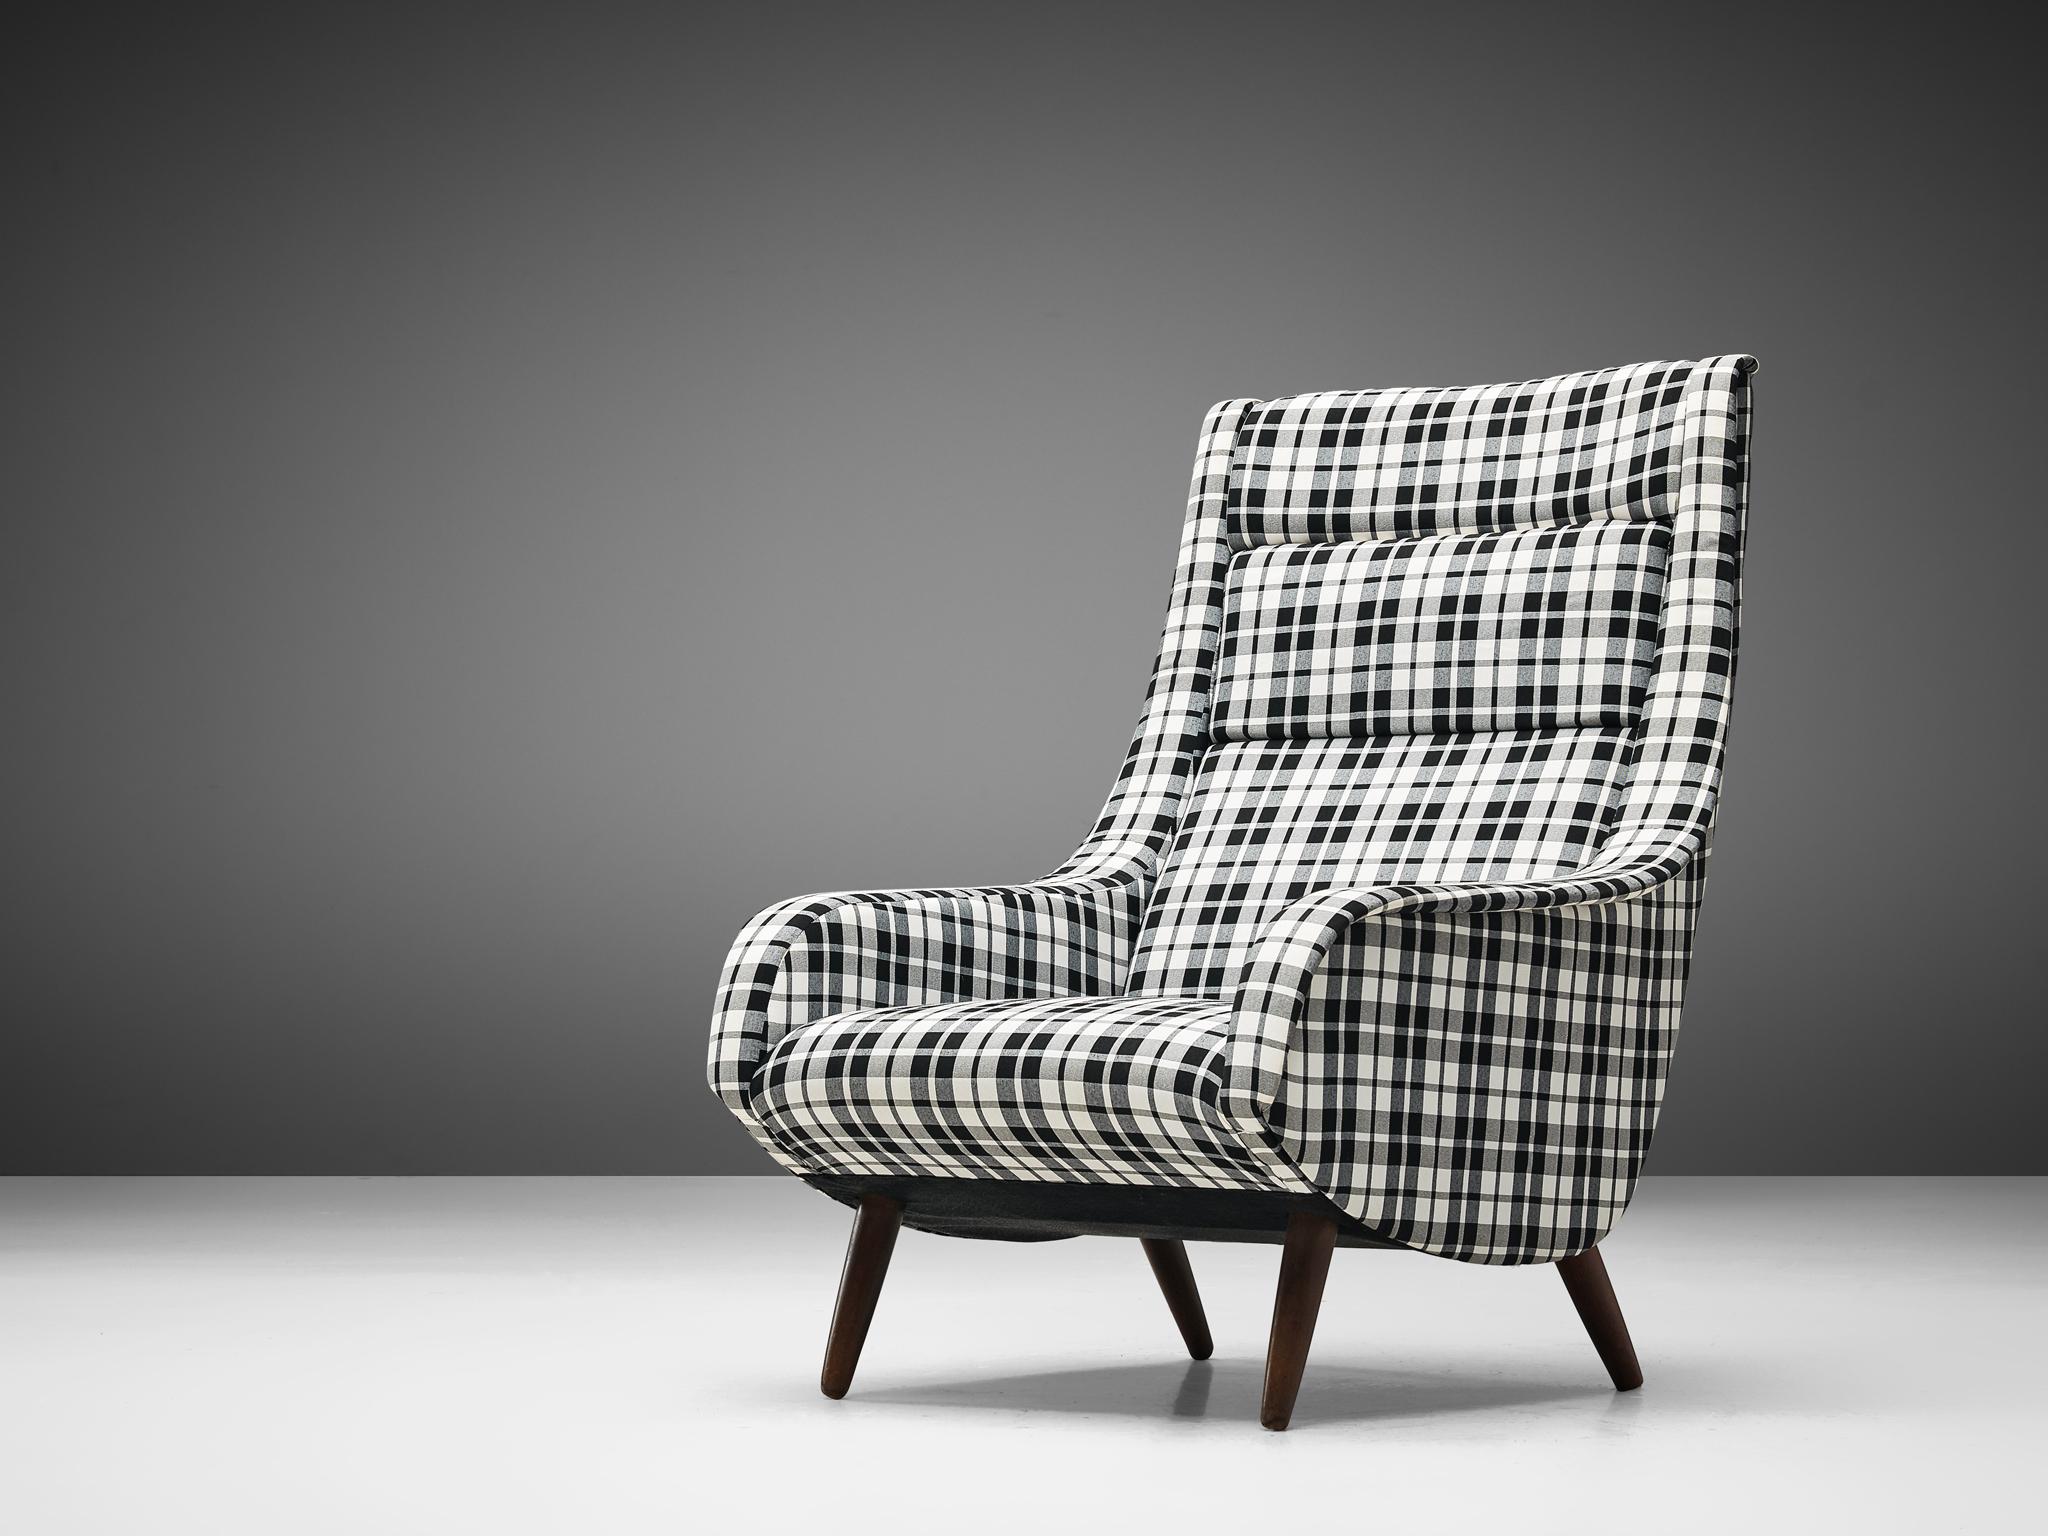 Lounge chair, fabric, wood, Denmark, 1960s
 
This easy chair invites you to spend more time on it due to the imposing, high backrest which is slightly tilted. The presence of armrests makes it possible to lay down your arms comfortably. The outer